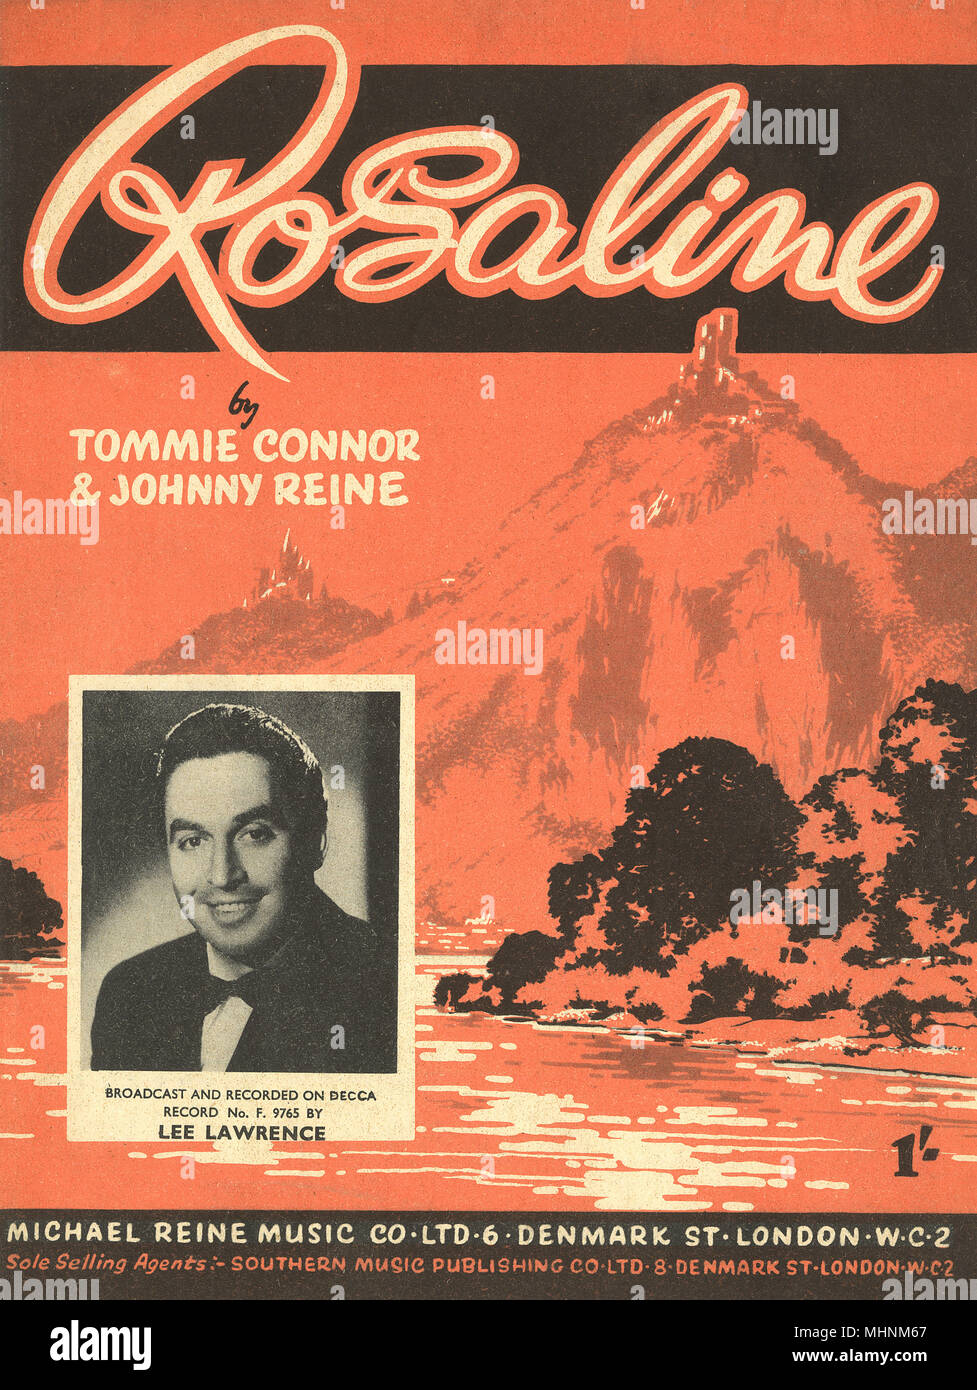 Rosaline - Music Sheet Cover by Tommie Connor and Johnny Reine, broadcast and recorded by Lee Lawrence. An illustration with a photo of Lee Lawrence on the left bottom.     Date: circa 1951 Stock Photo